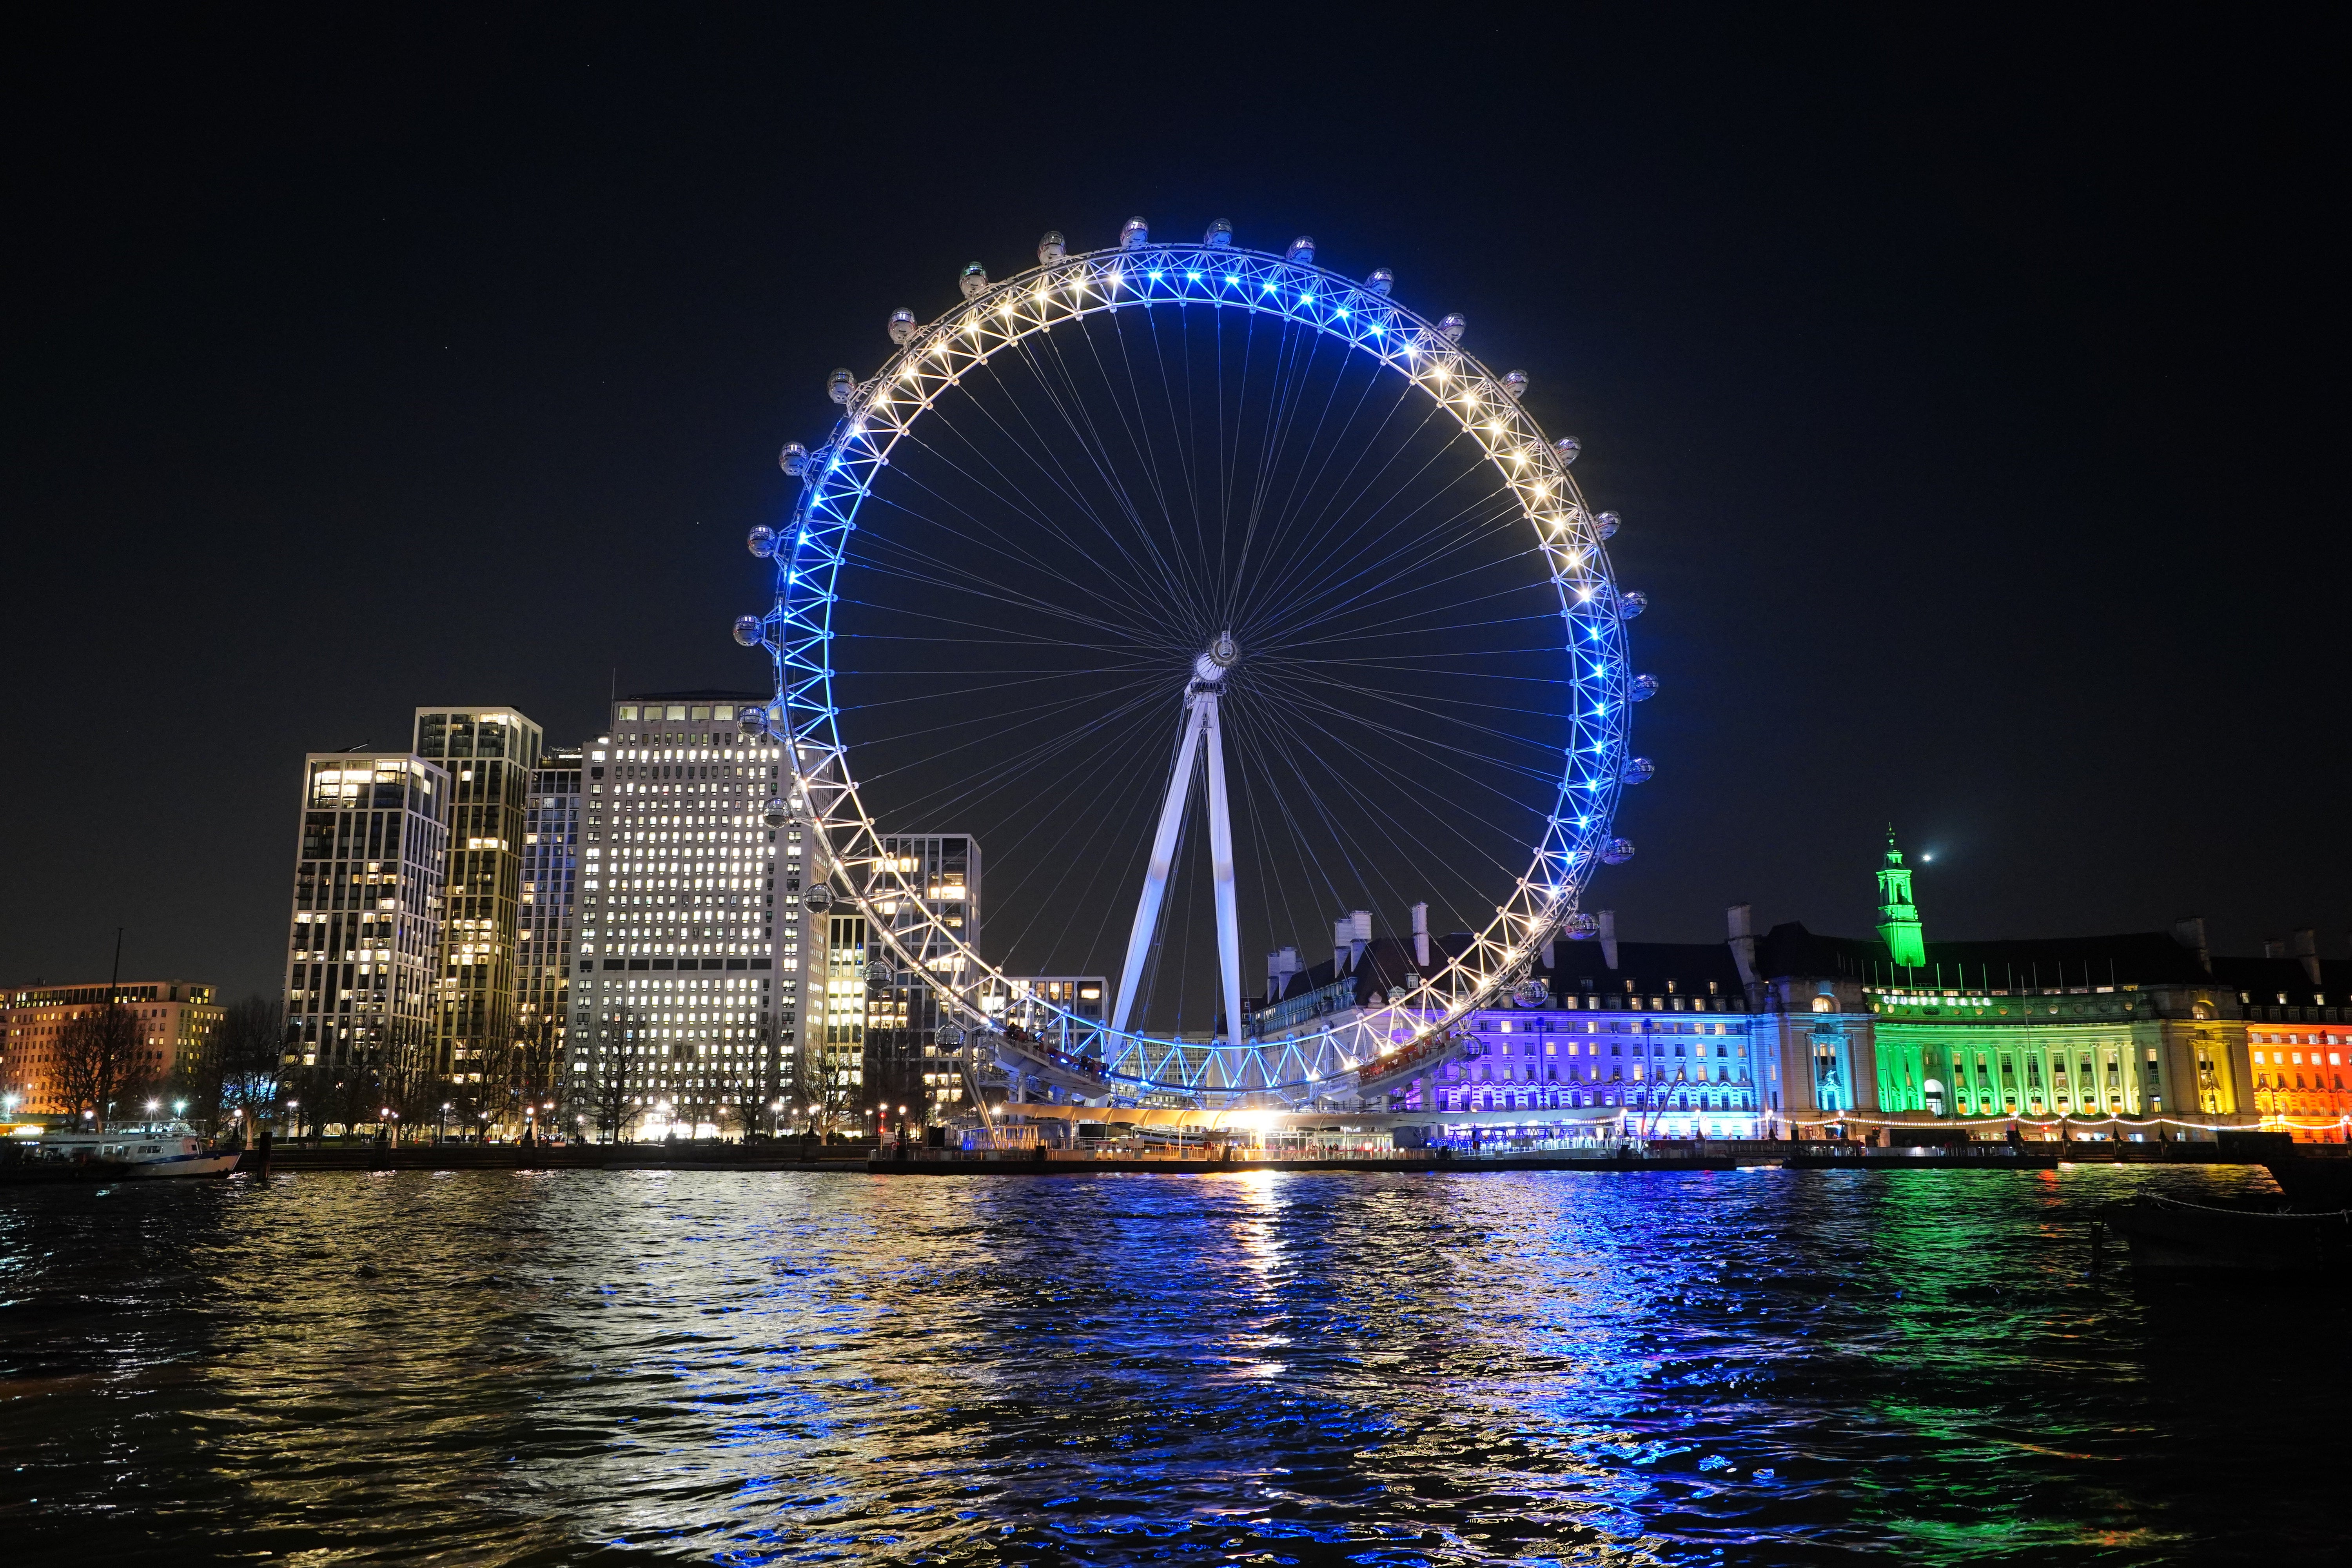 The lastminute.com London Eye in London is lit up in yellow and blue in an expression of solidarity with Ukraine following Russia’s invasion (Dominic Lipinski/PA)